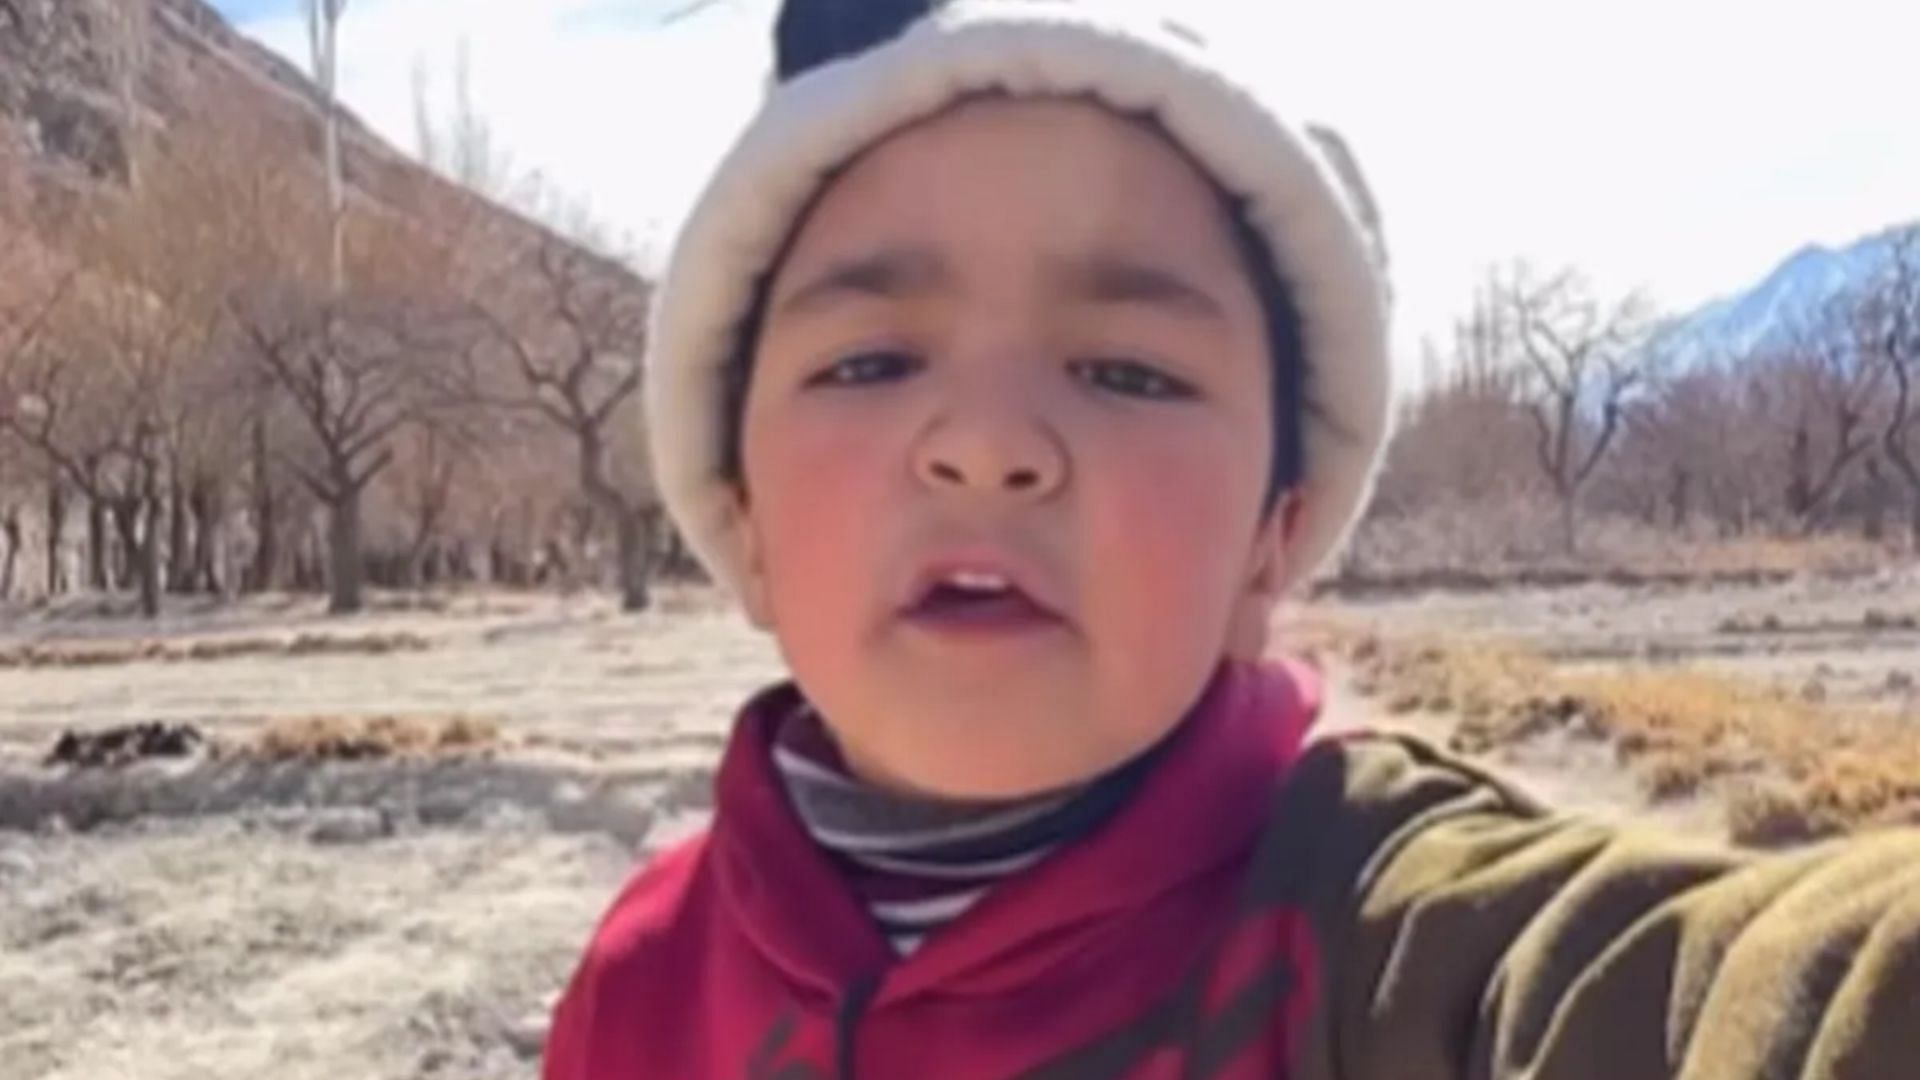 Youngest Vlogger Of Pakistan is becoming quite popular funny videos of shiraz